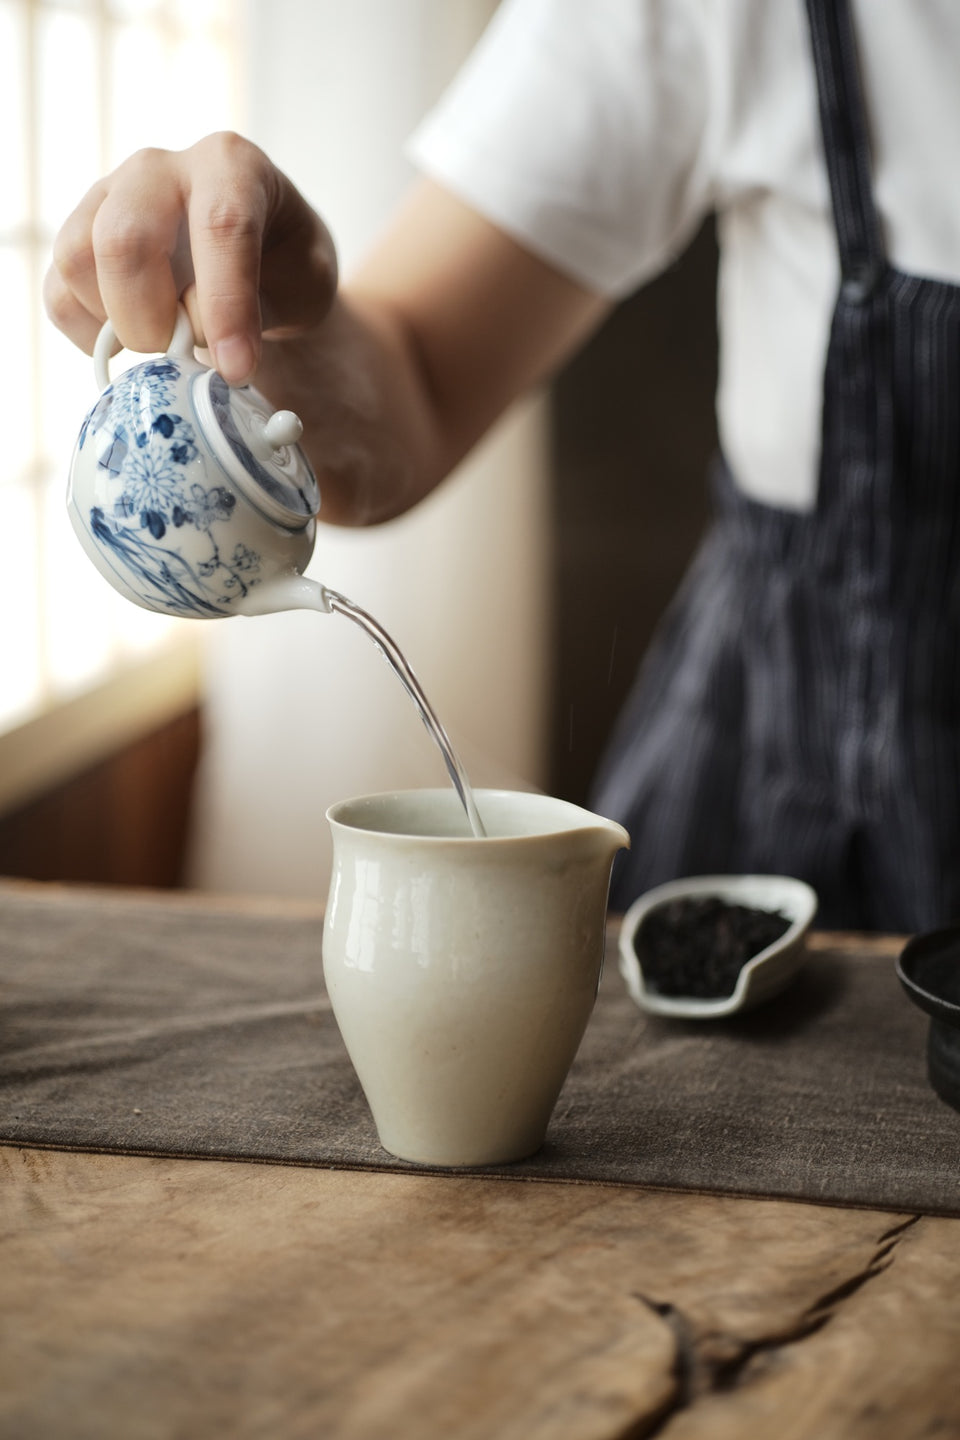 Four Flowers Qinghua Blue and White teapot